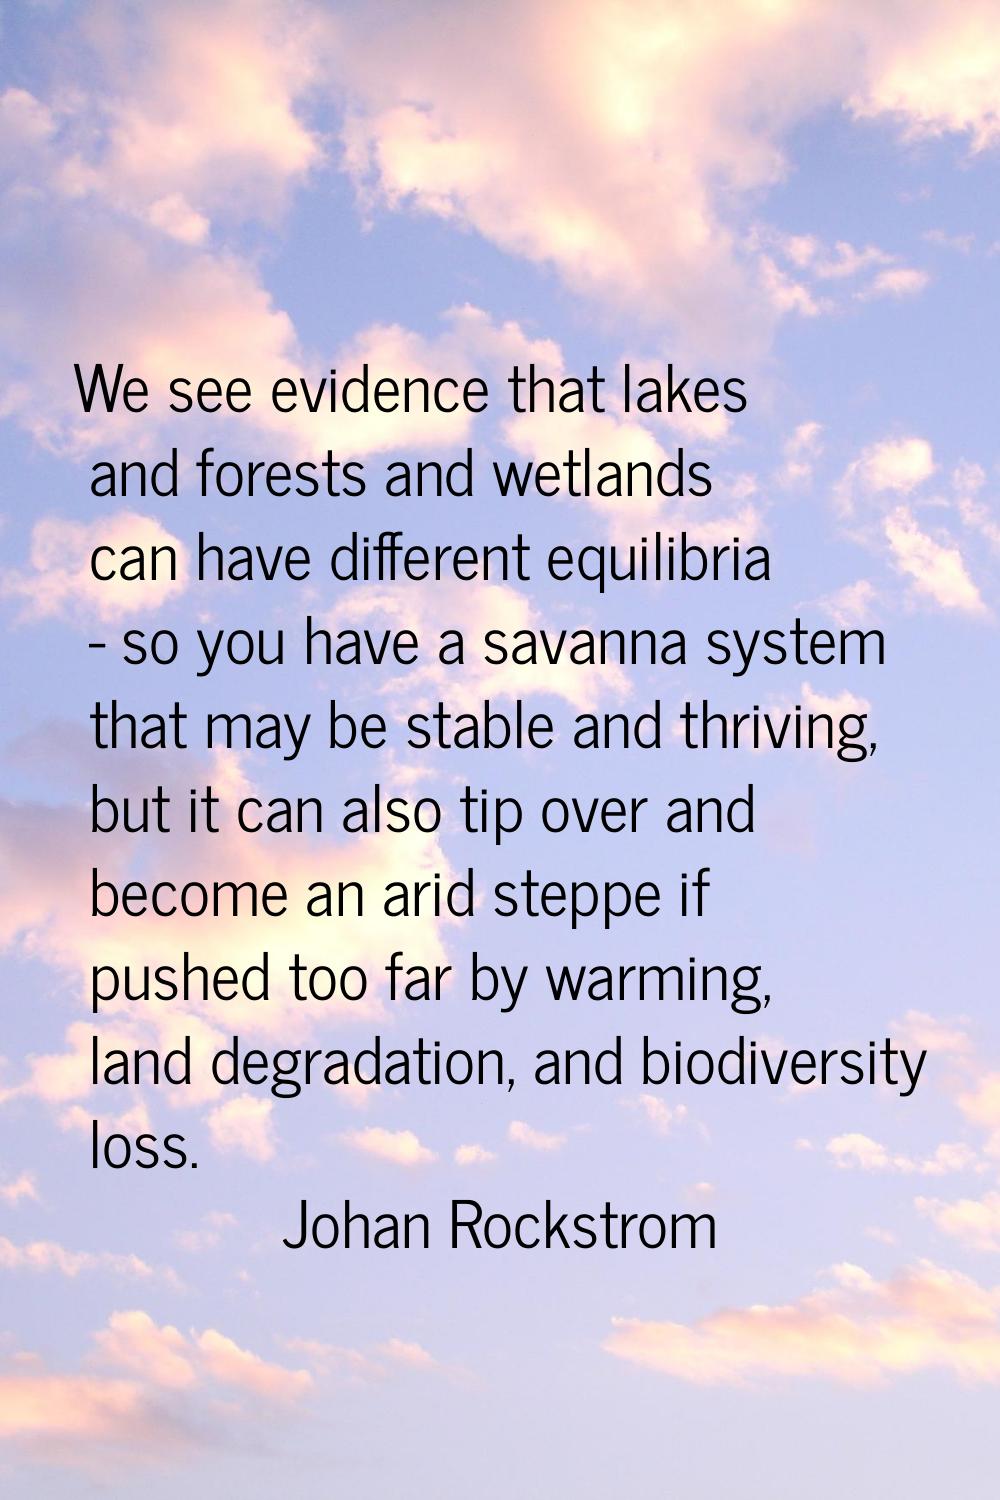 We see evidence that lakes and forests and wetlands can have different equilibria - so you have a s